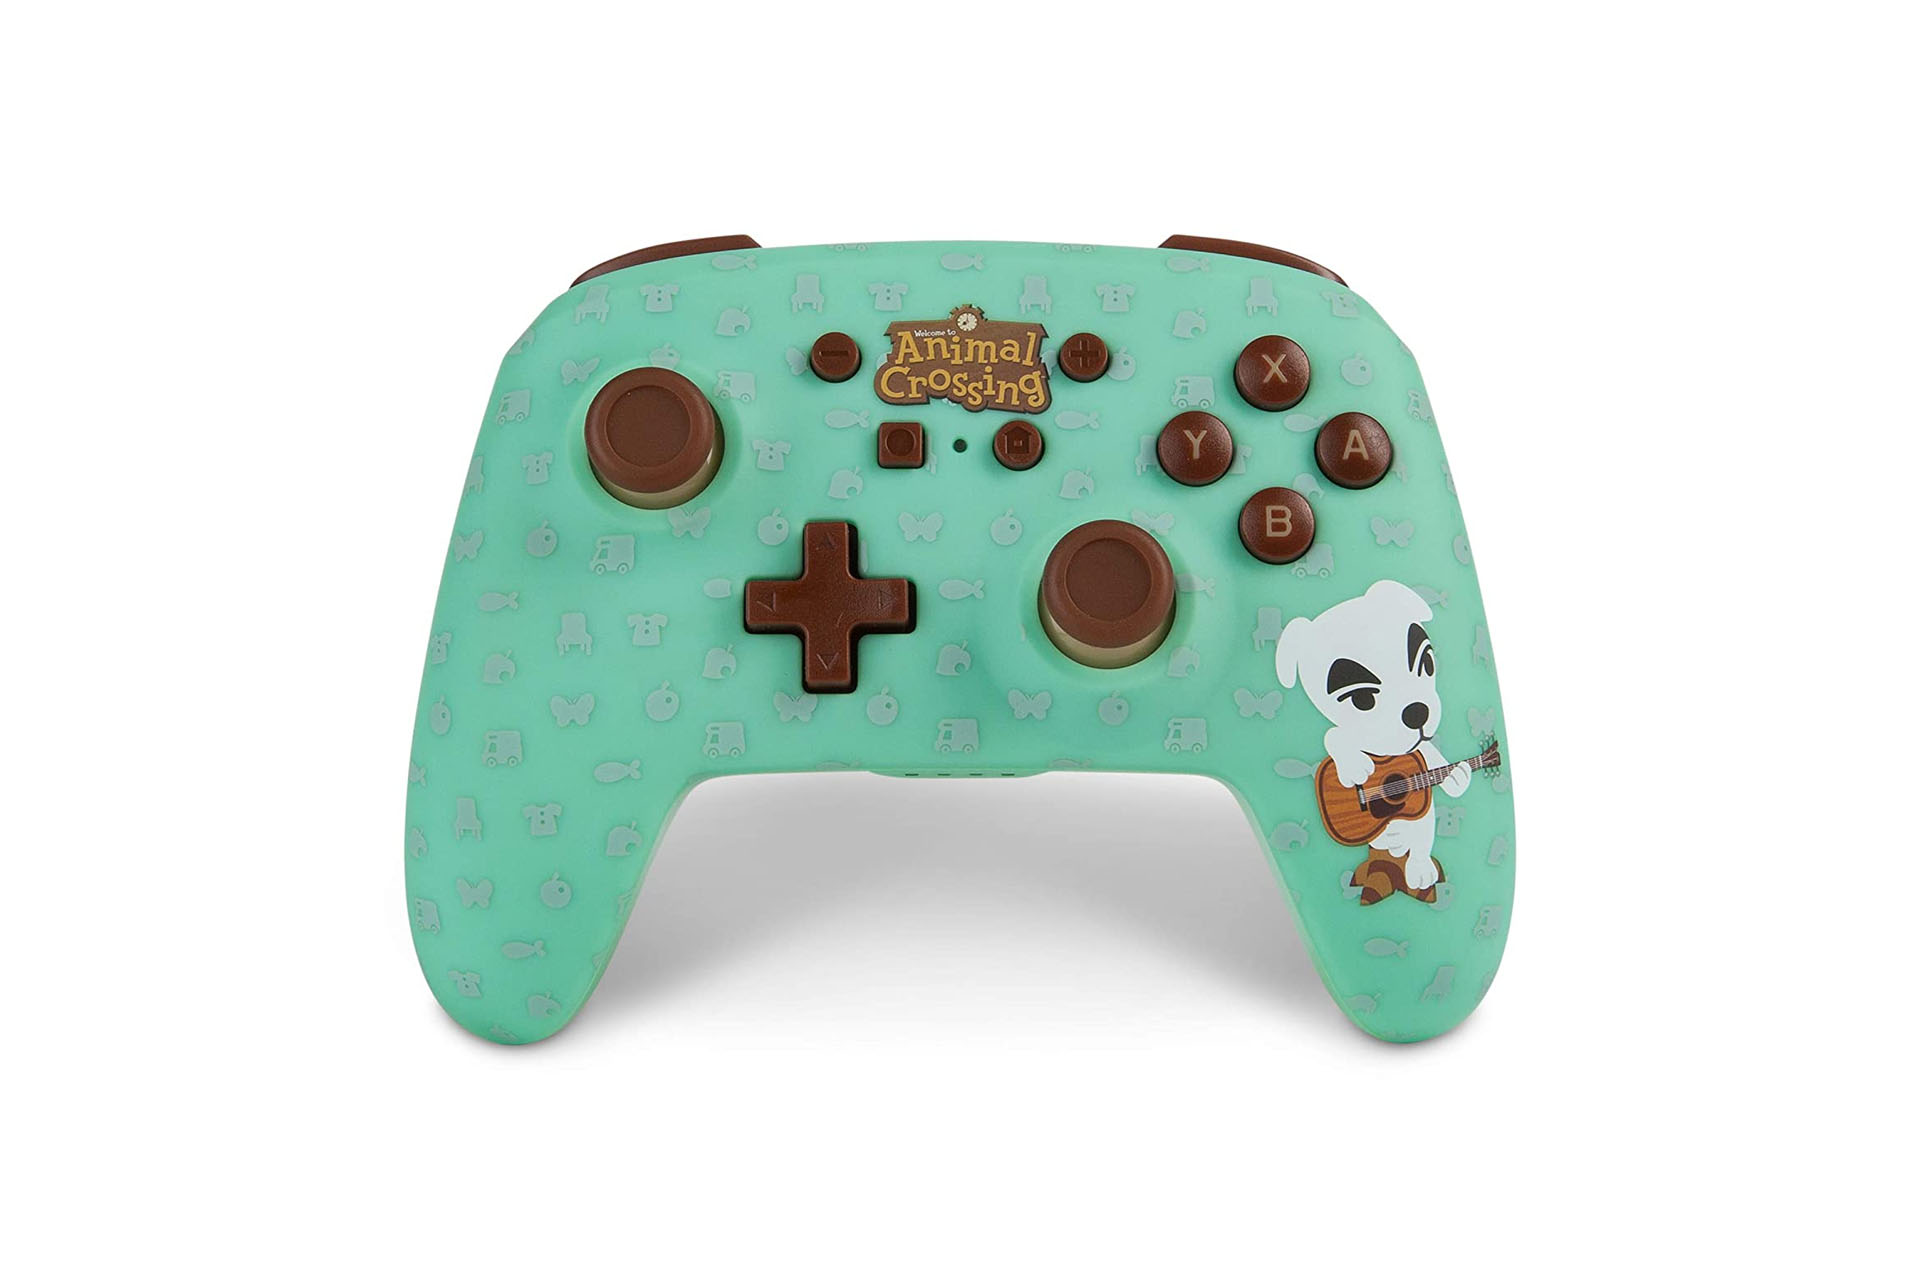 A product shot of the PowerA Nintendo Switch Animal Crossing controller